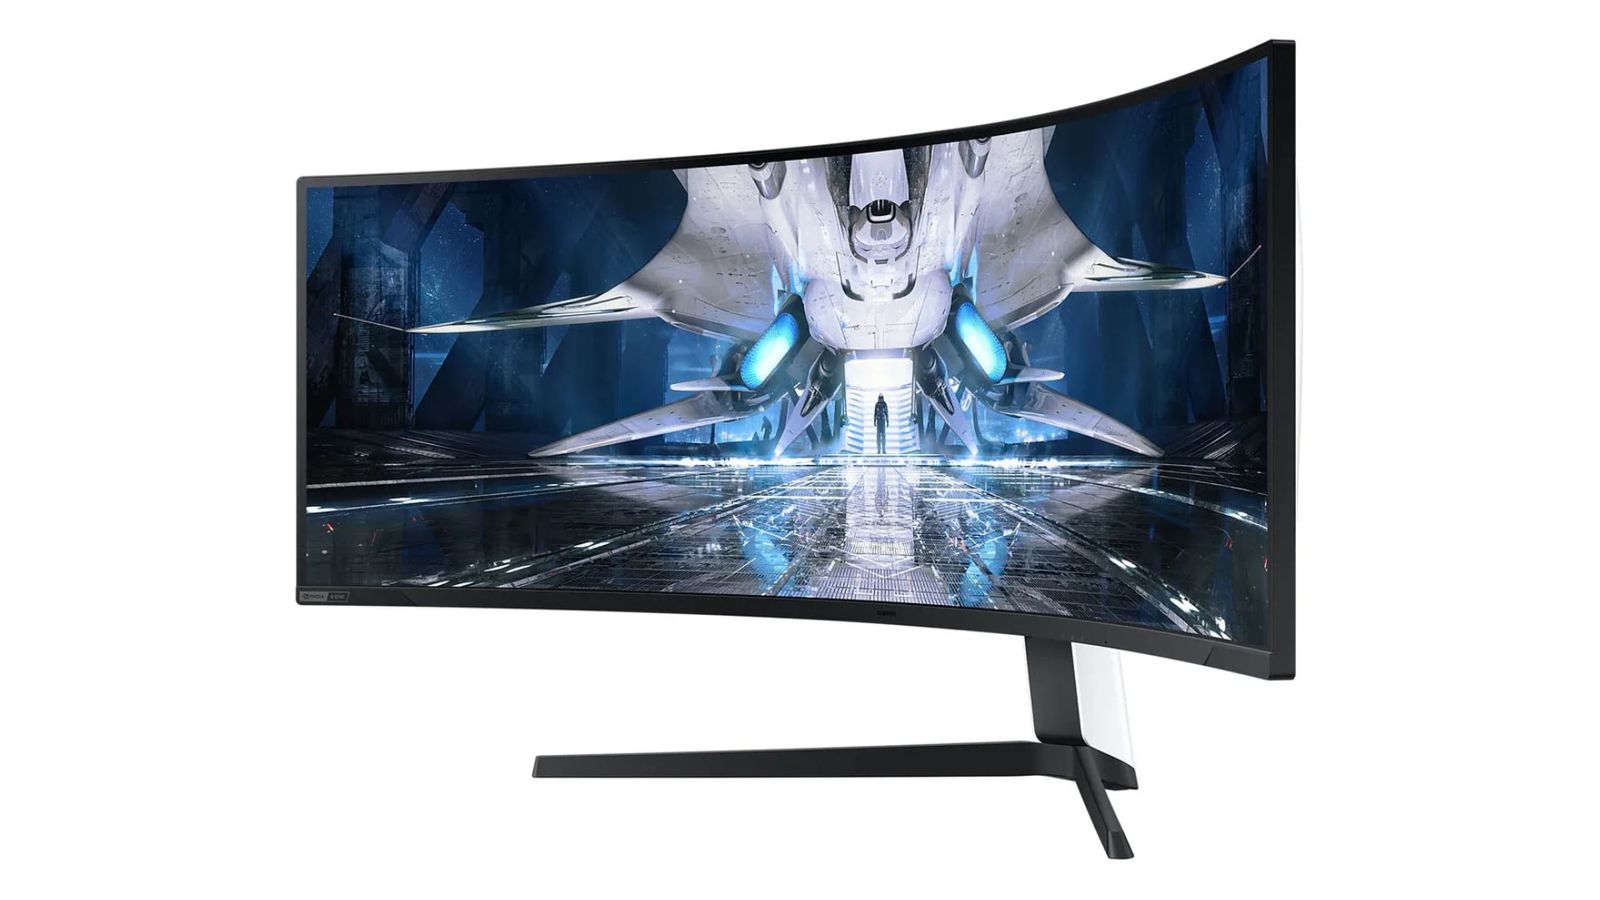 Best monitor for F1 22 - Samsung Odyssey Neo G9 product image of an ultrawide curved monitor with a black frame.